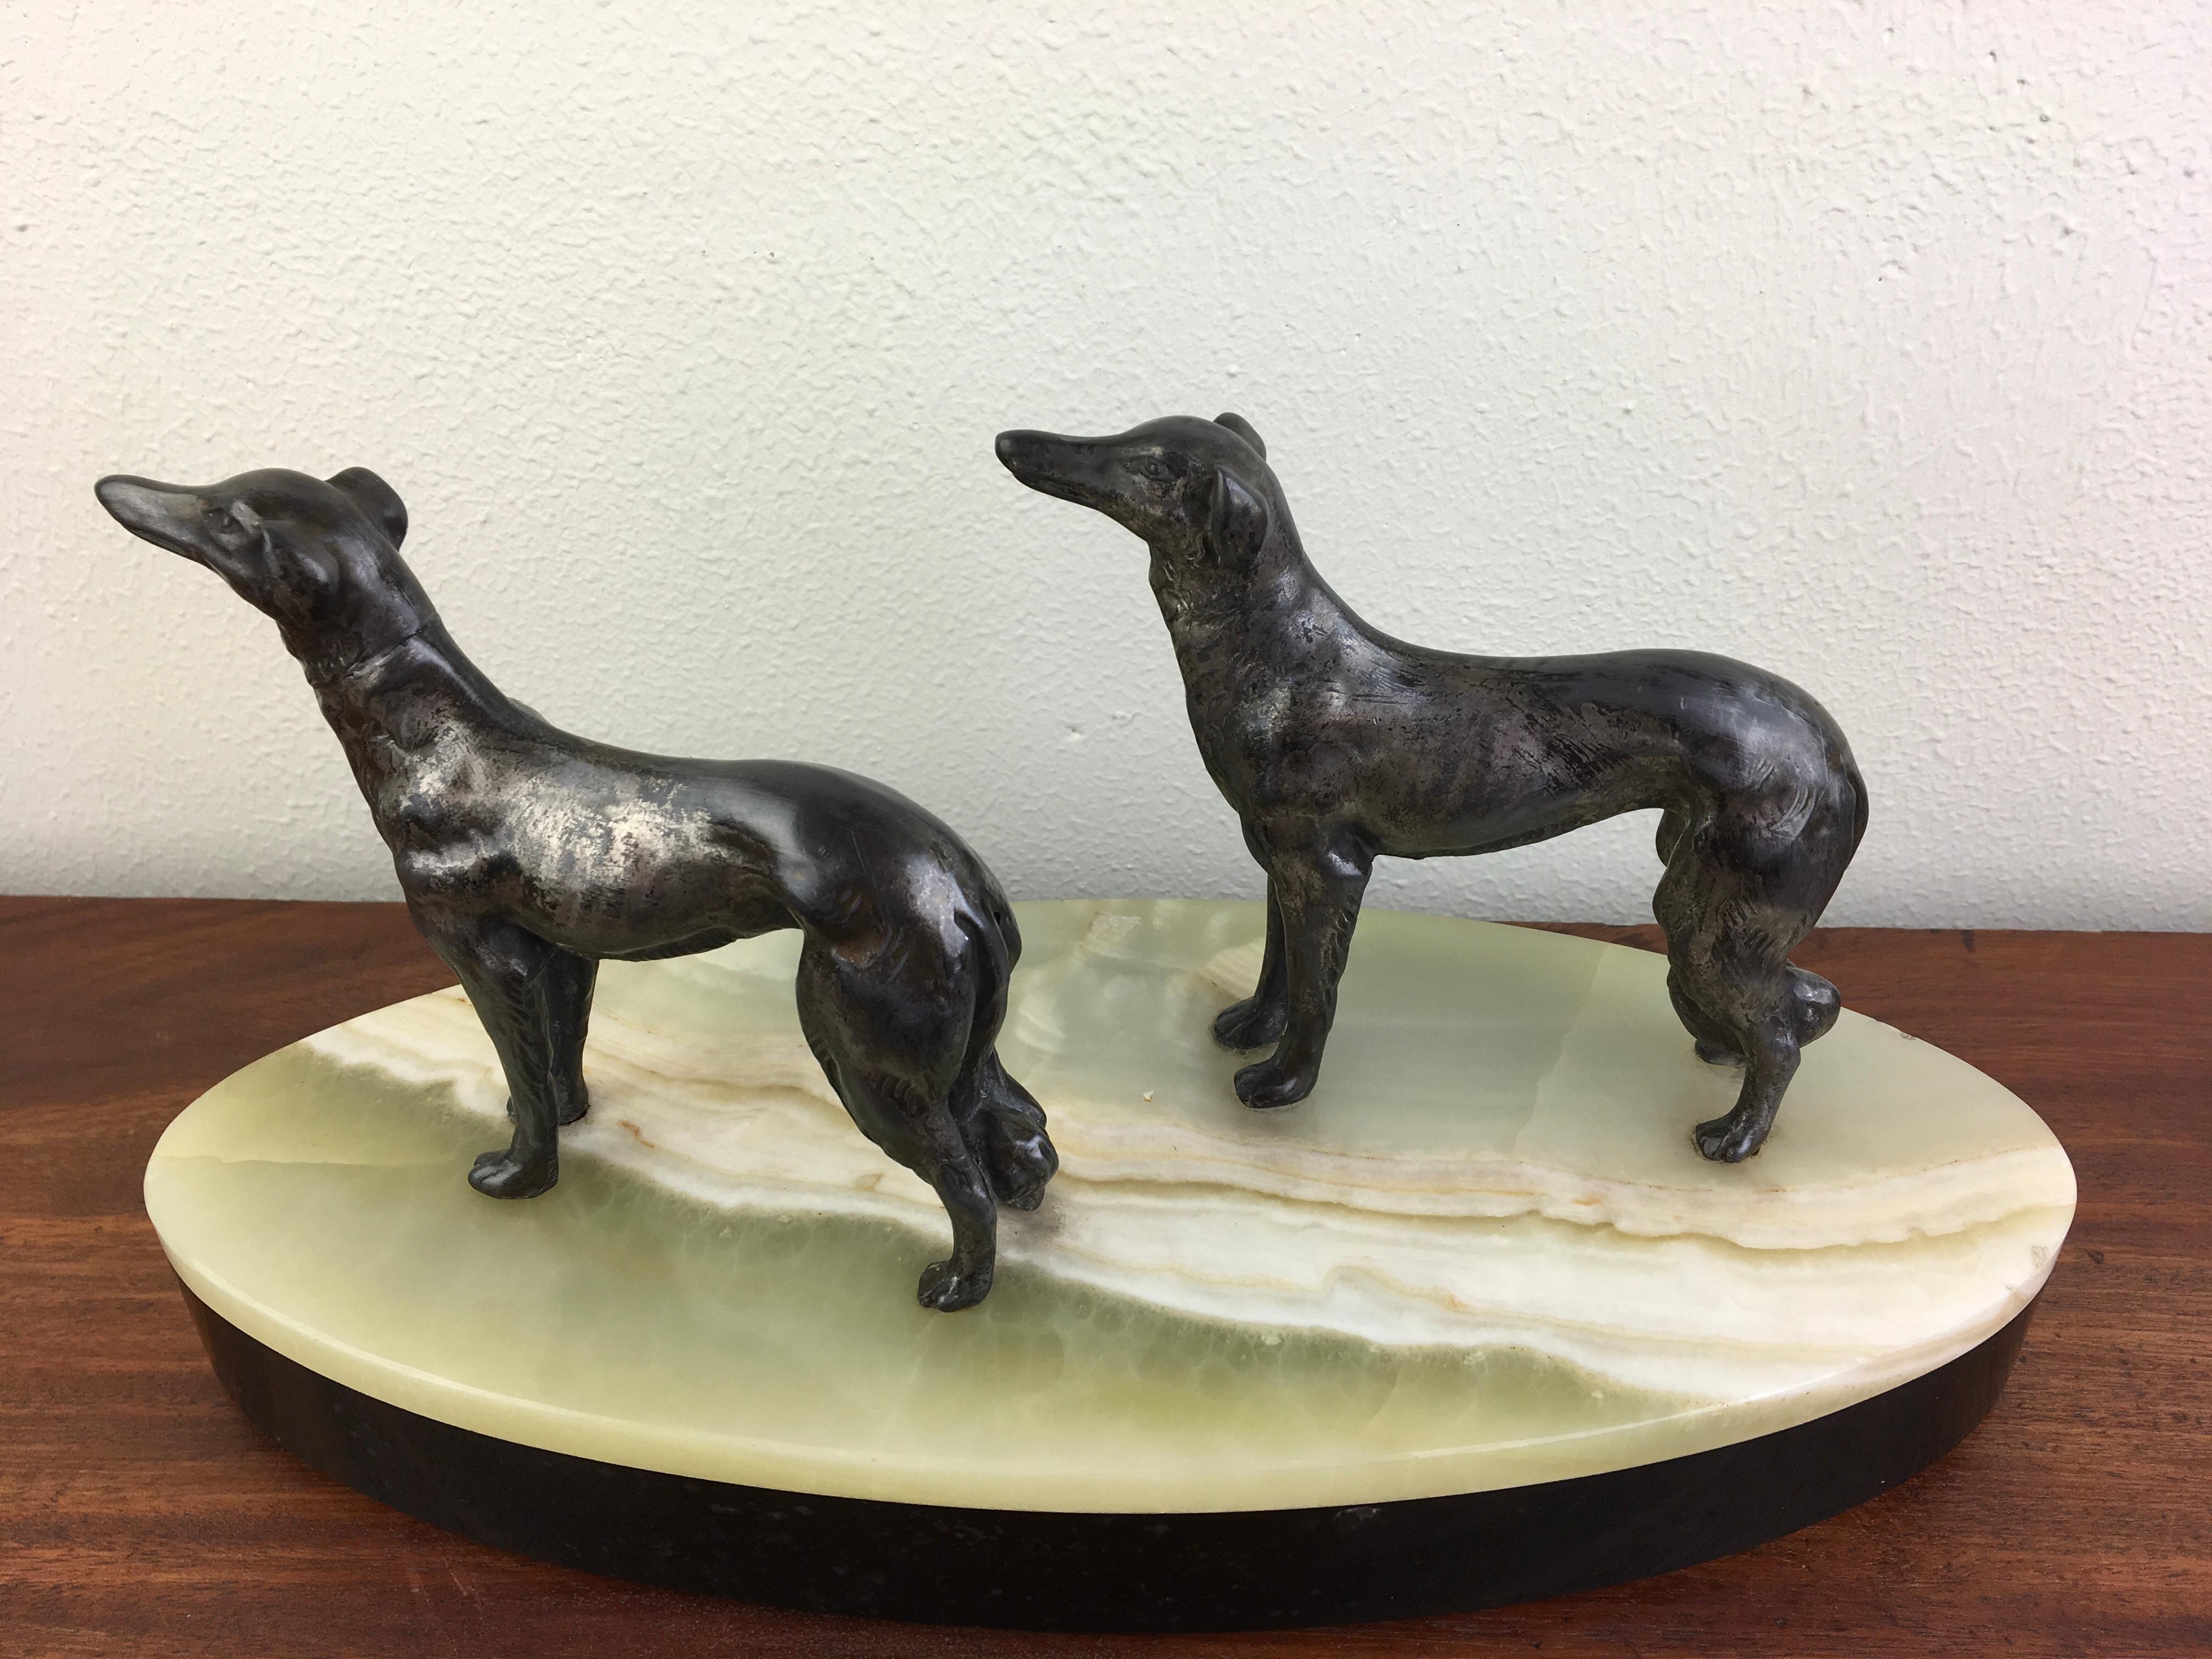 Art Deco group of greyhounds - Whipped dogs mounted on a oval marble base. 
This two spelter dog figurines look fine on the two toned marble base. 
It's a stylish statue - desk ornament for a dog lover - greyhound lover.